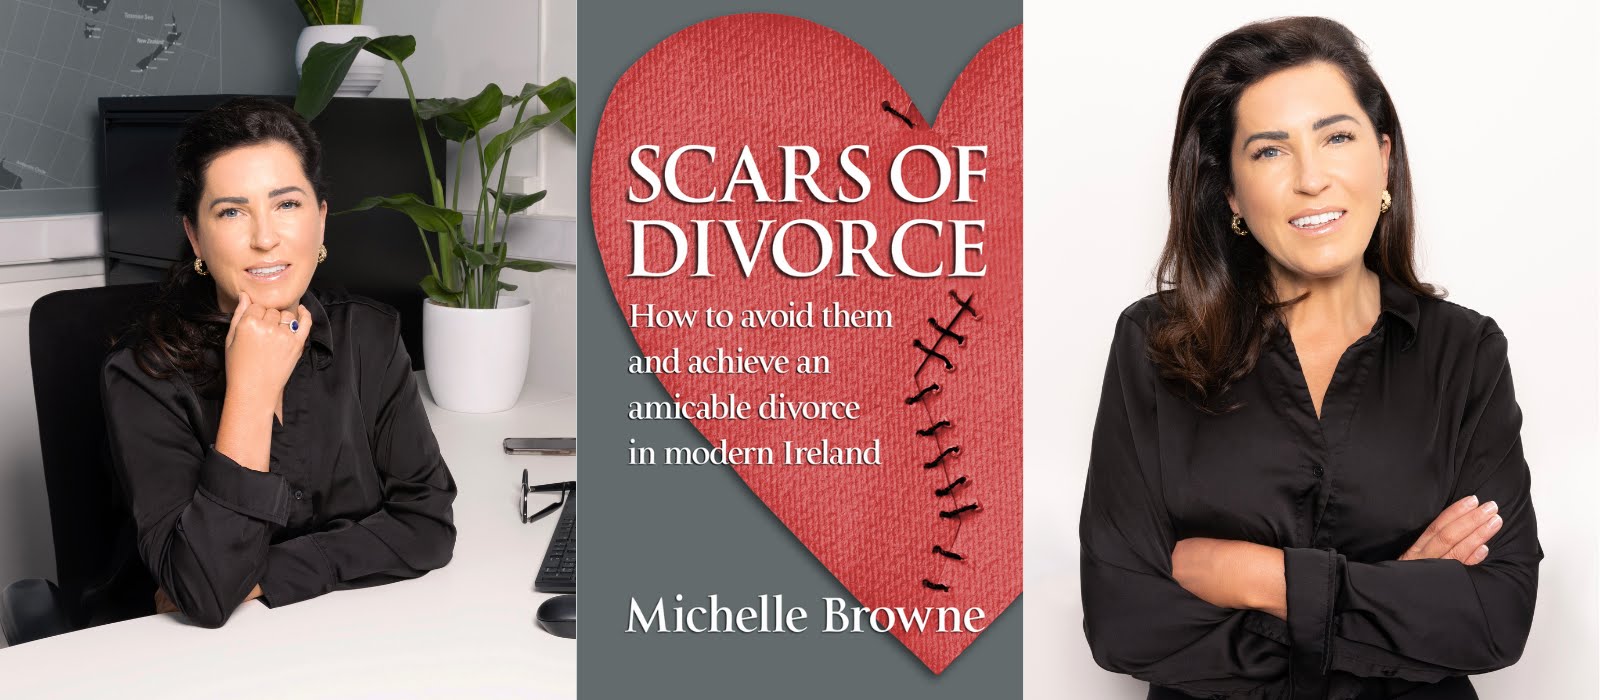 Michelle Browne: ‘My generation is the first in Ireland to have taken to the divorce courts en masse’